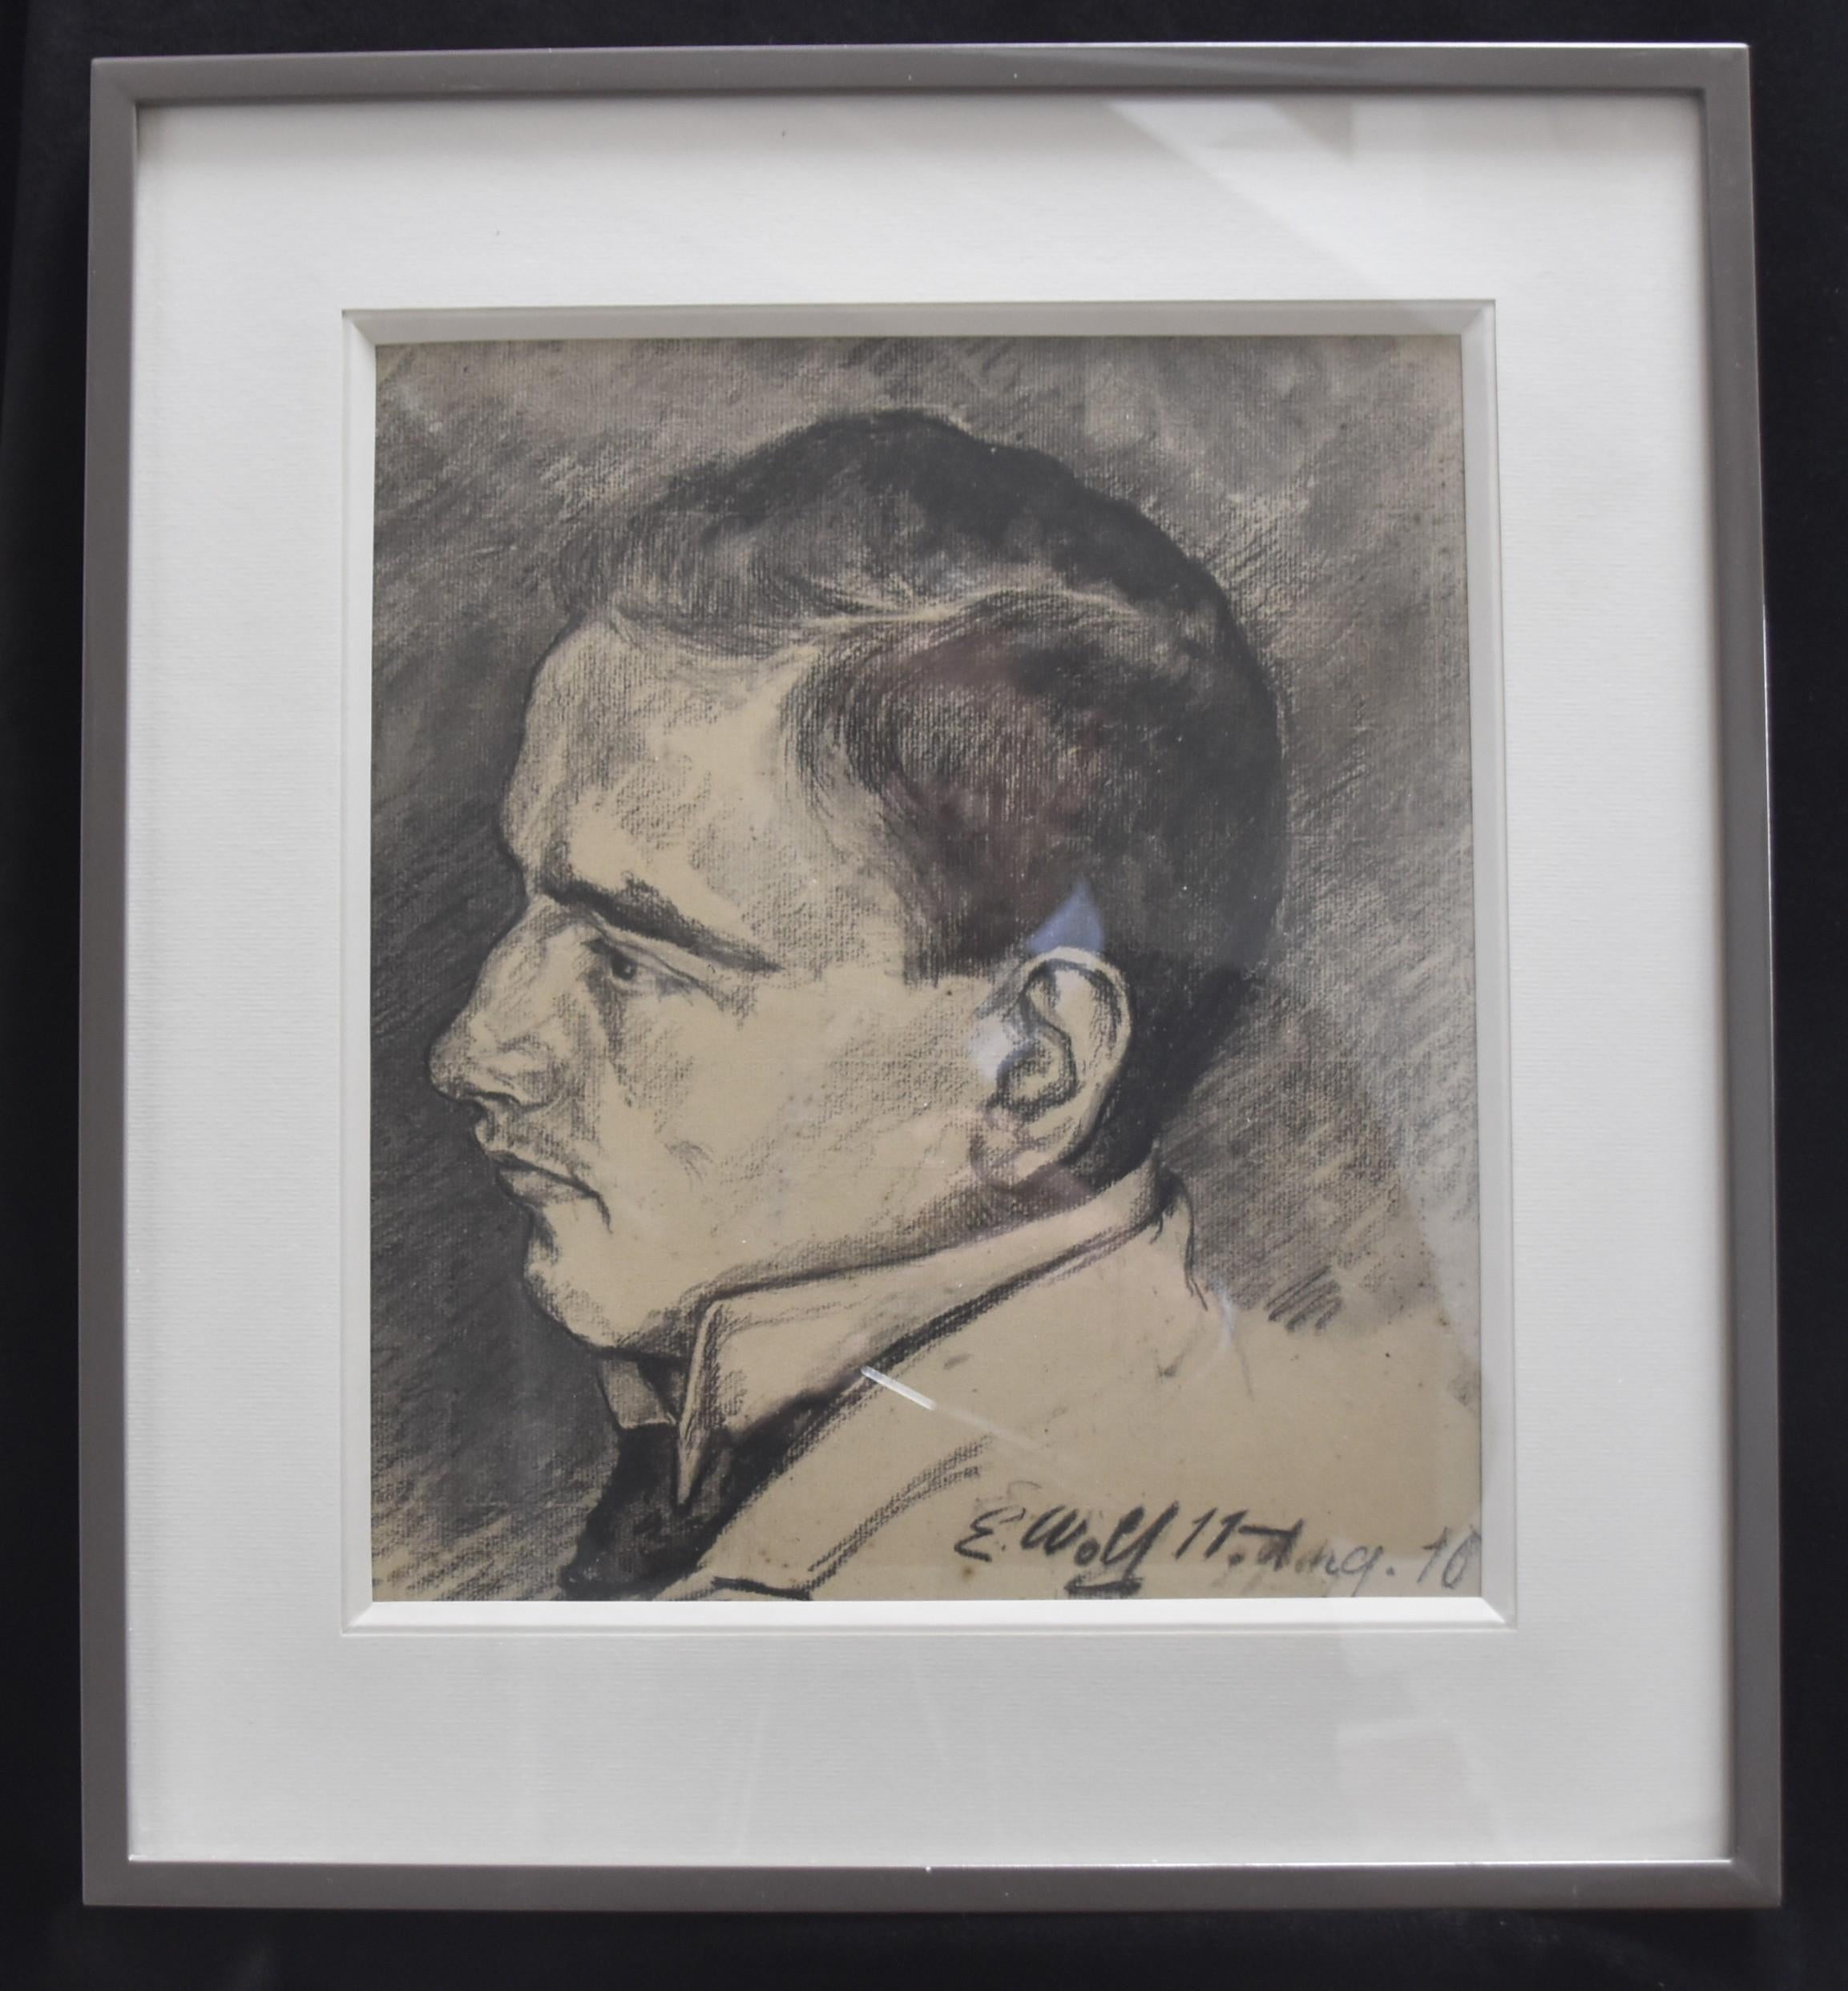 Elisabeth Wolf (1873-1964) 
Portrait of a man
Charcoal on paper
signed and dated: 